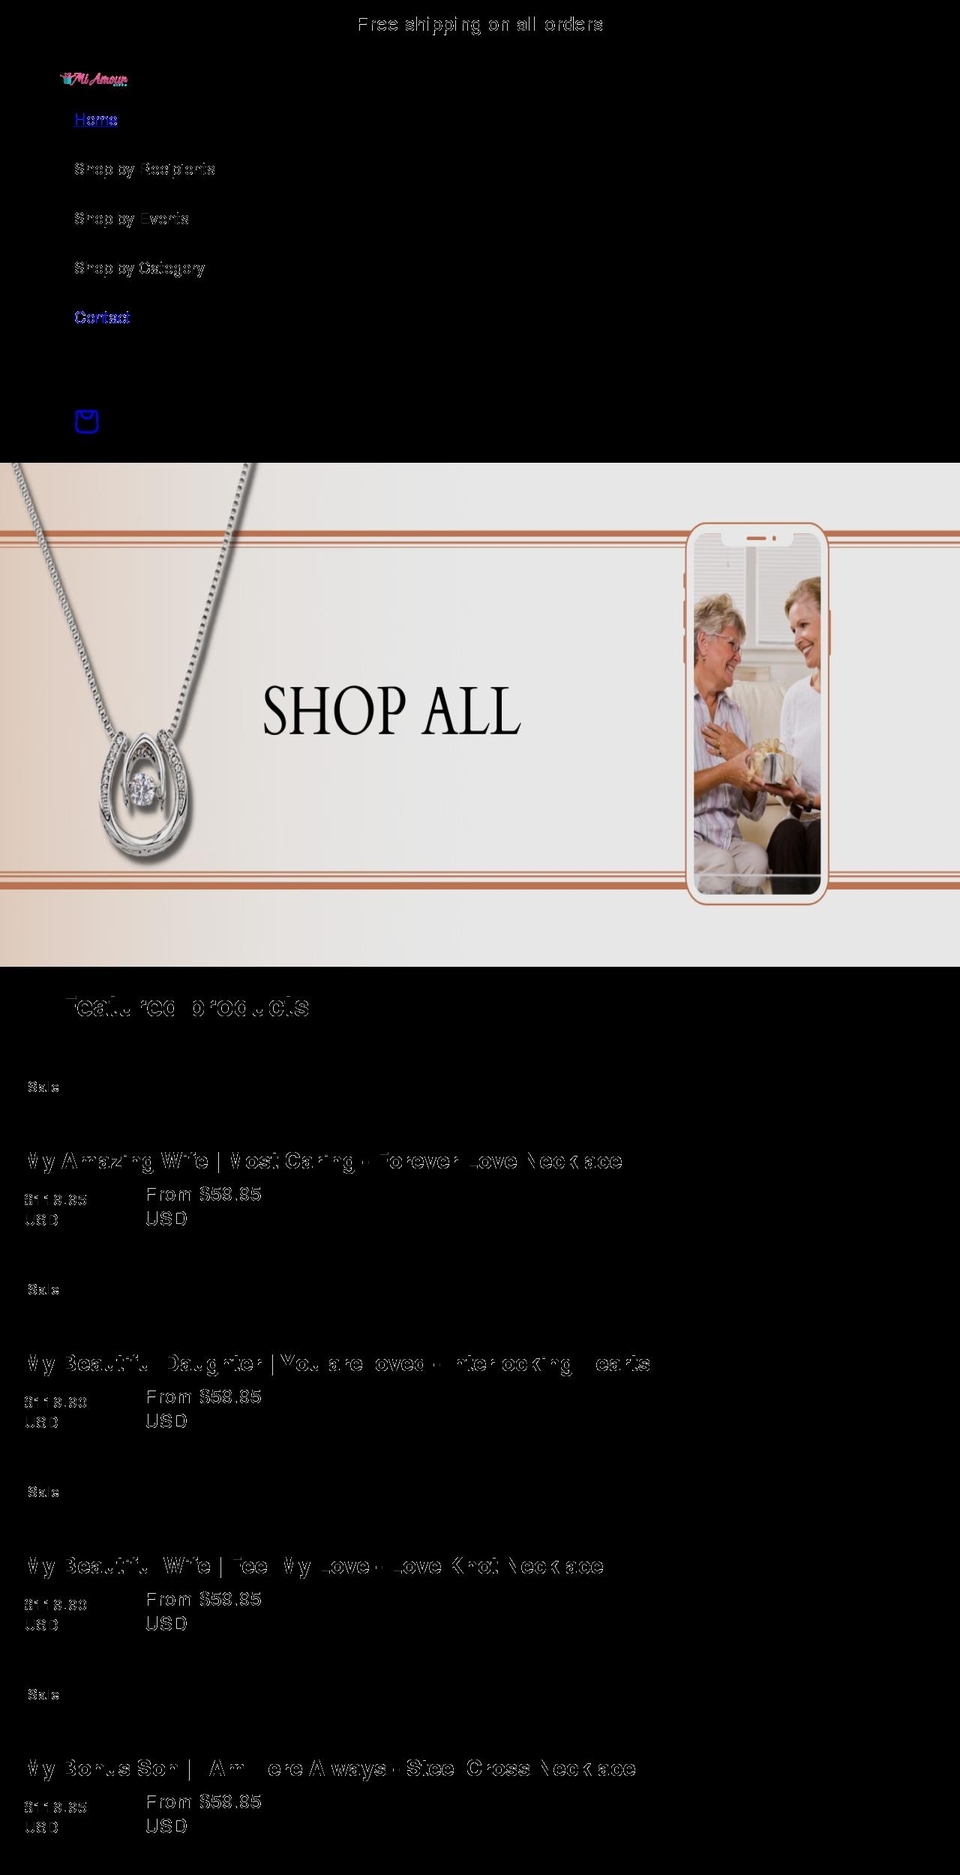 Gifts Shopify theme site example miamourgifts.com